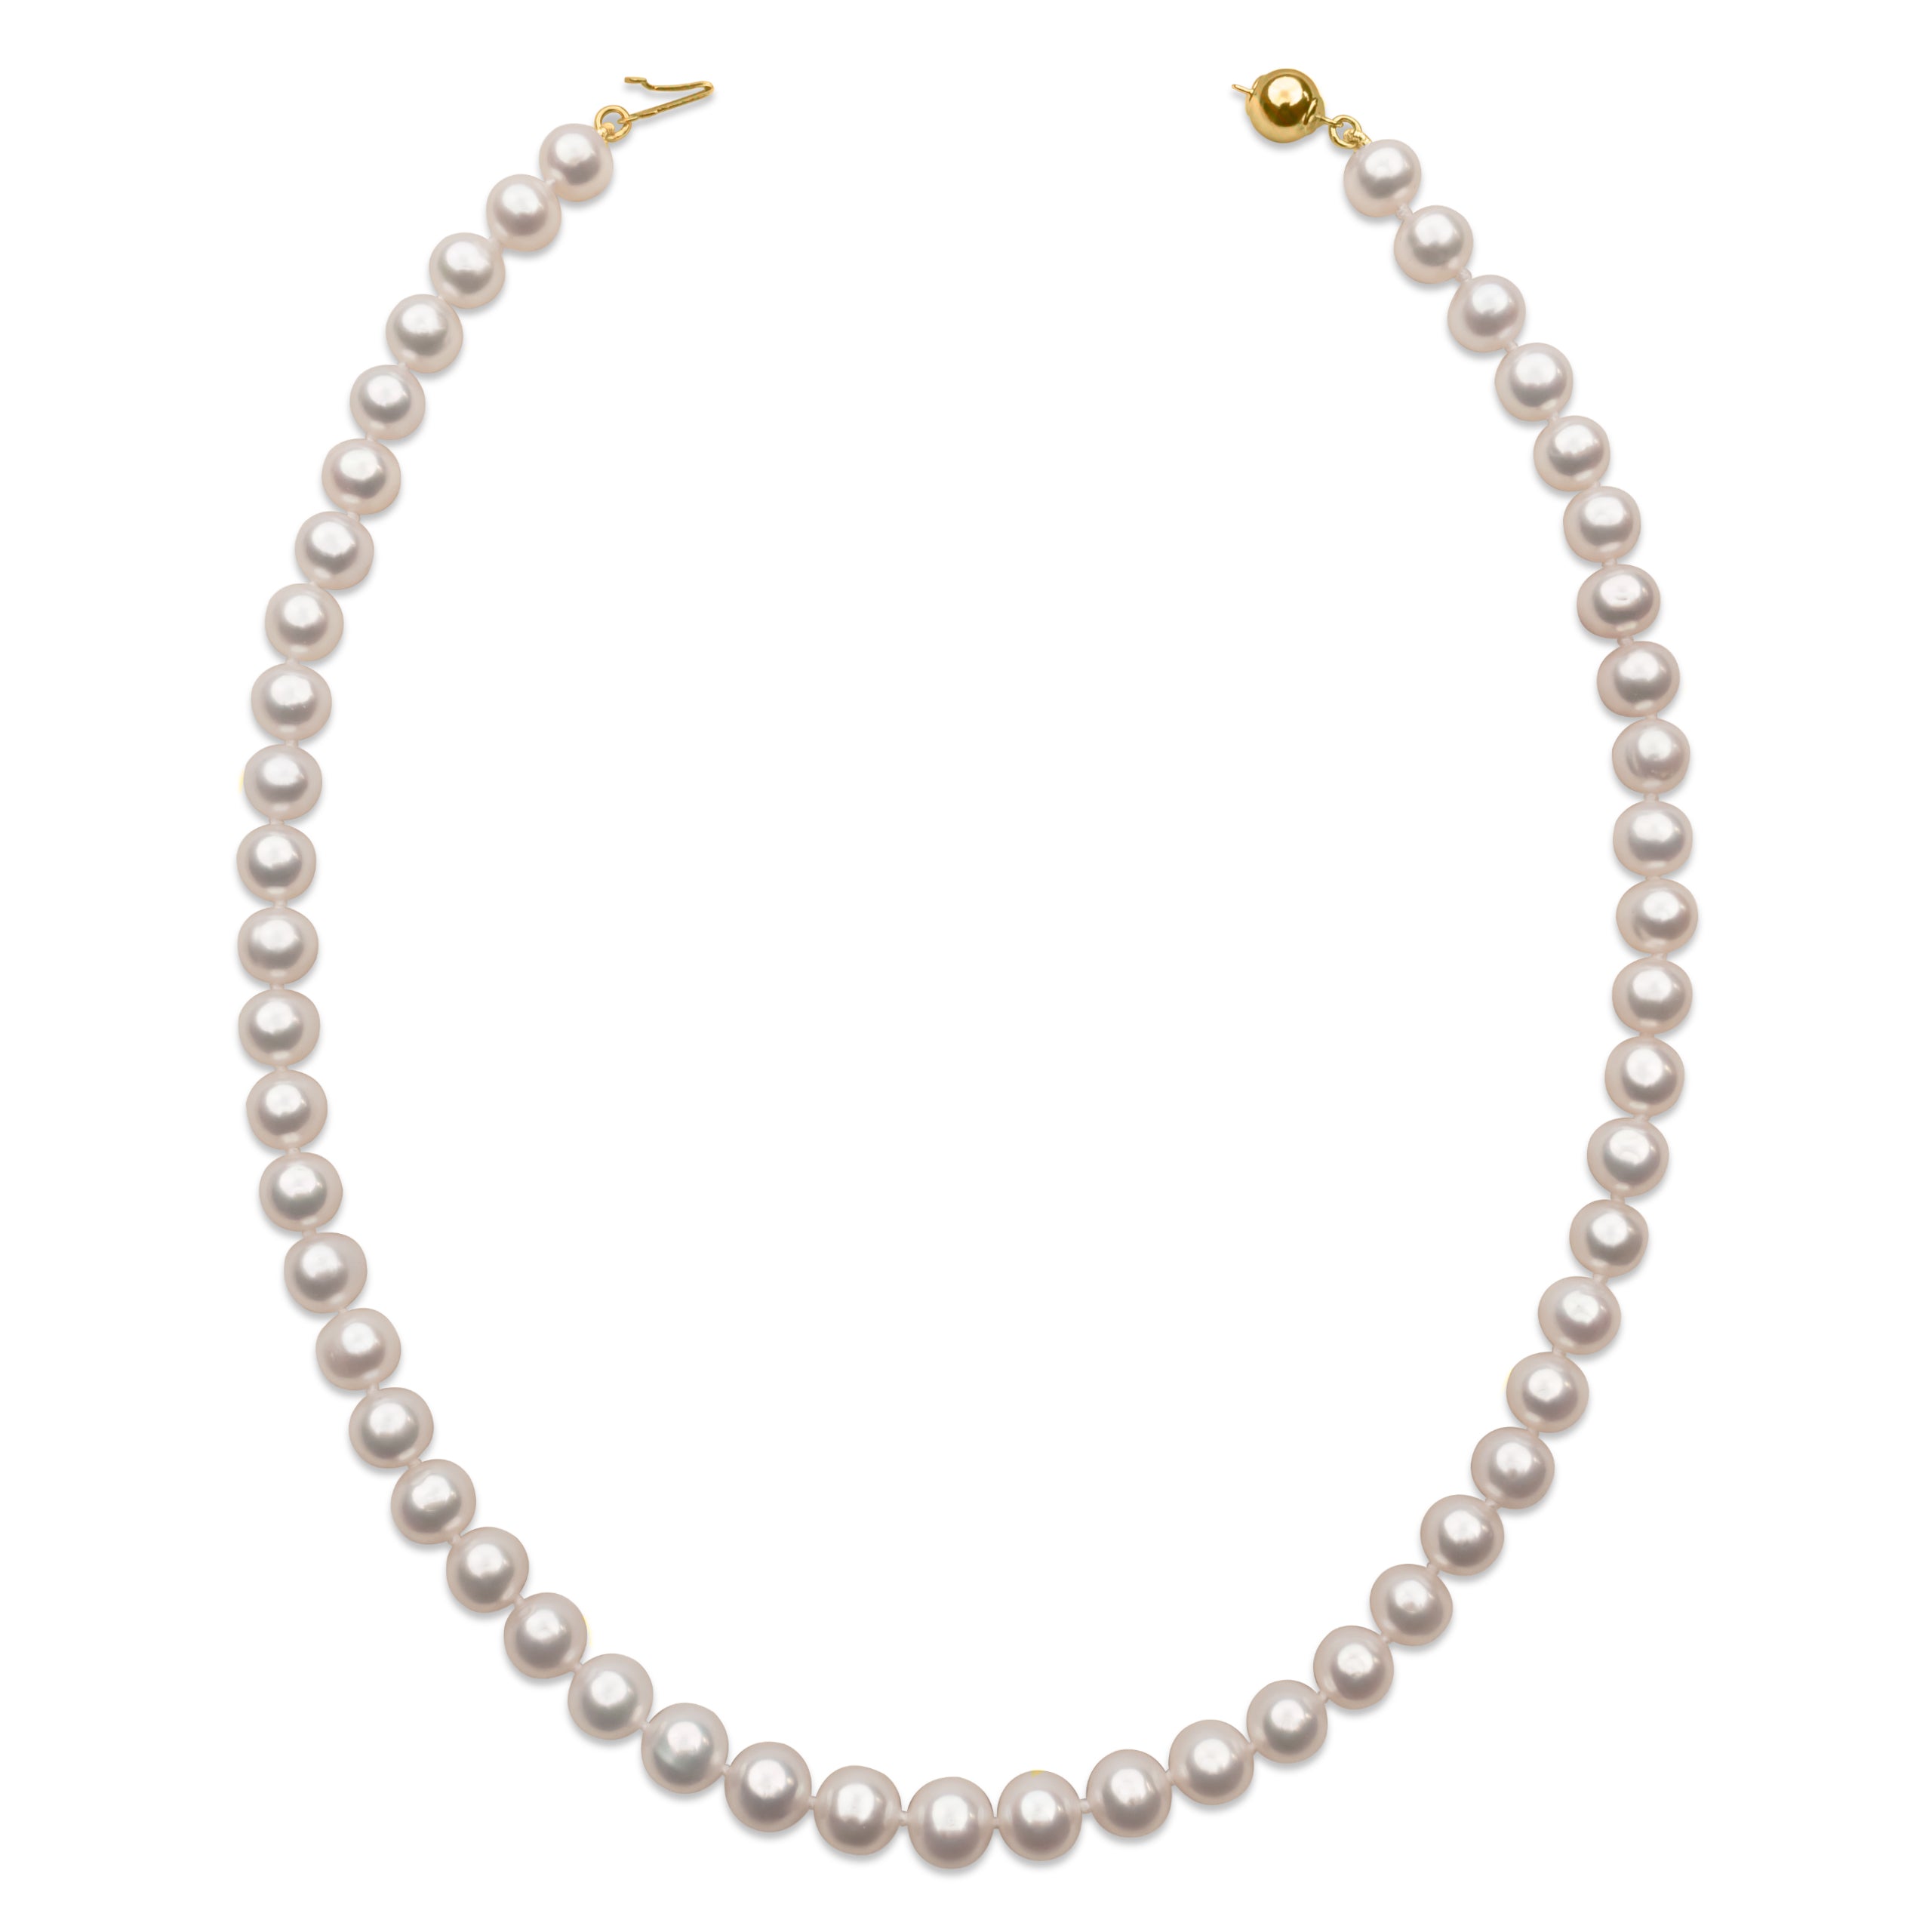 7.5-8.5mm AA+ Freshwater Cultured Pearl Necklace, 45cm long | 18K Gold